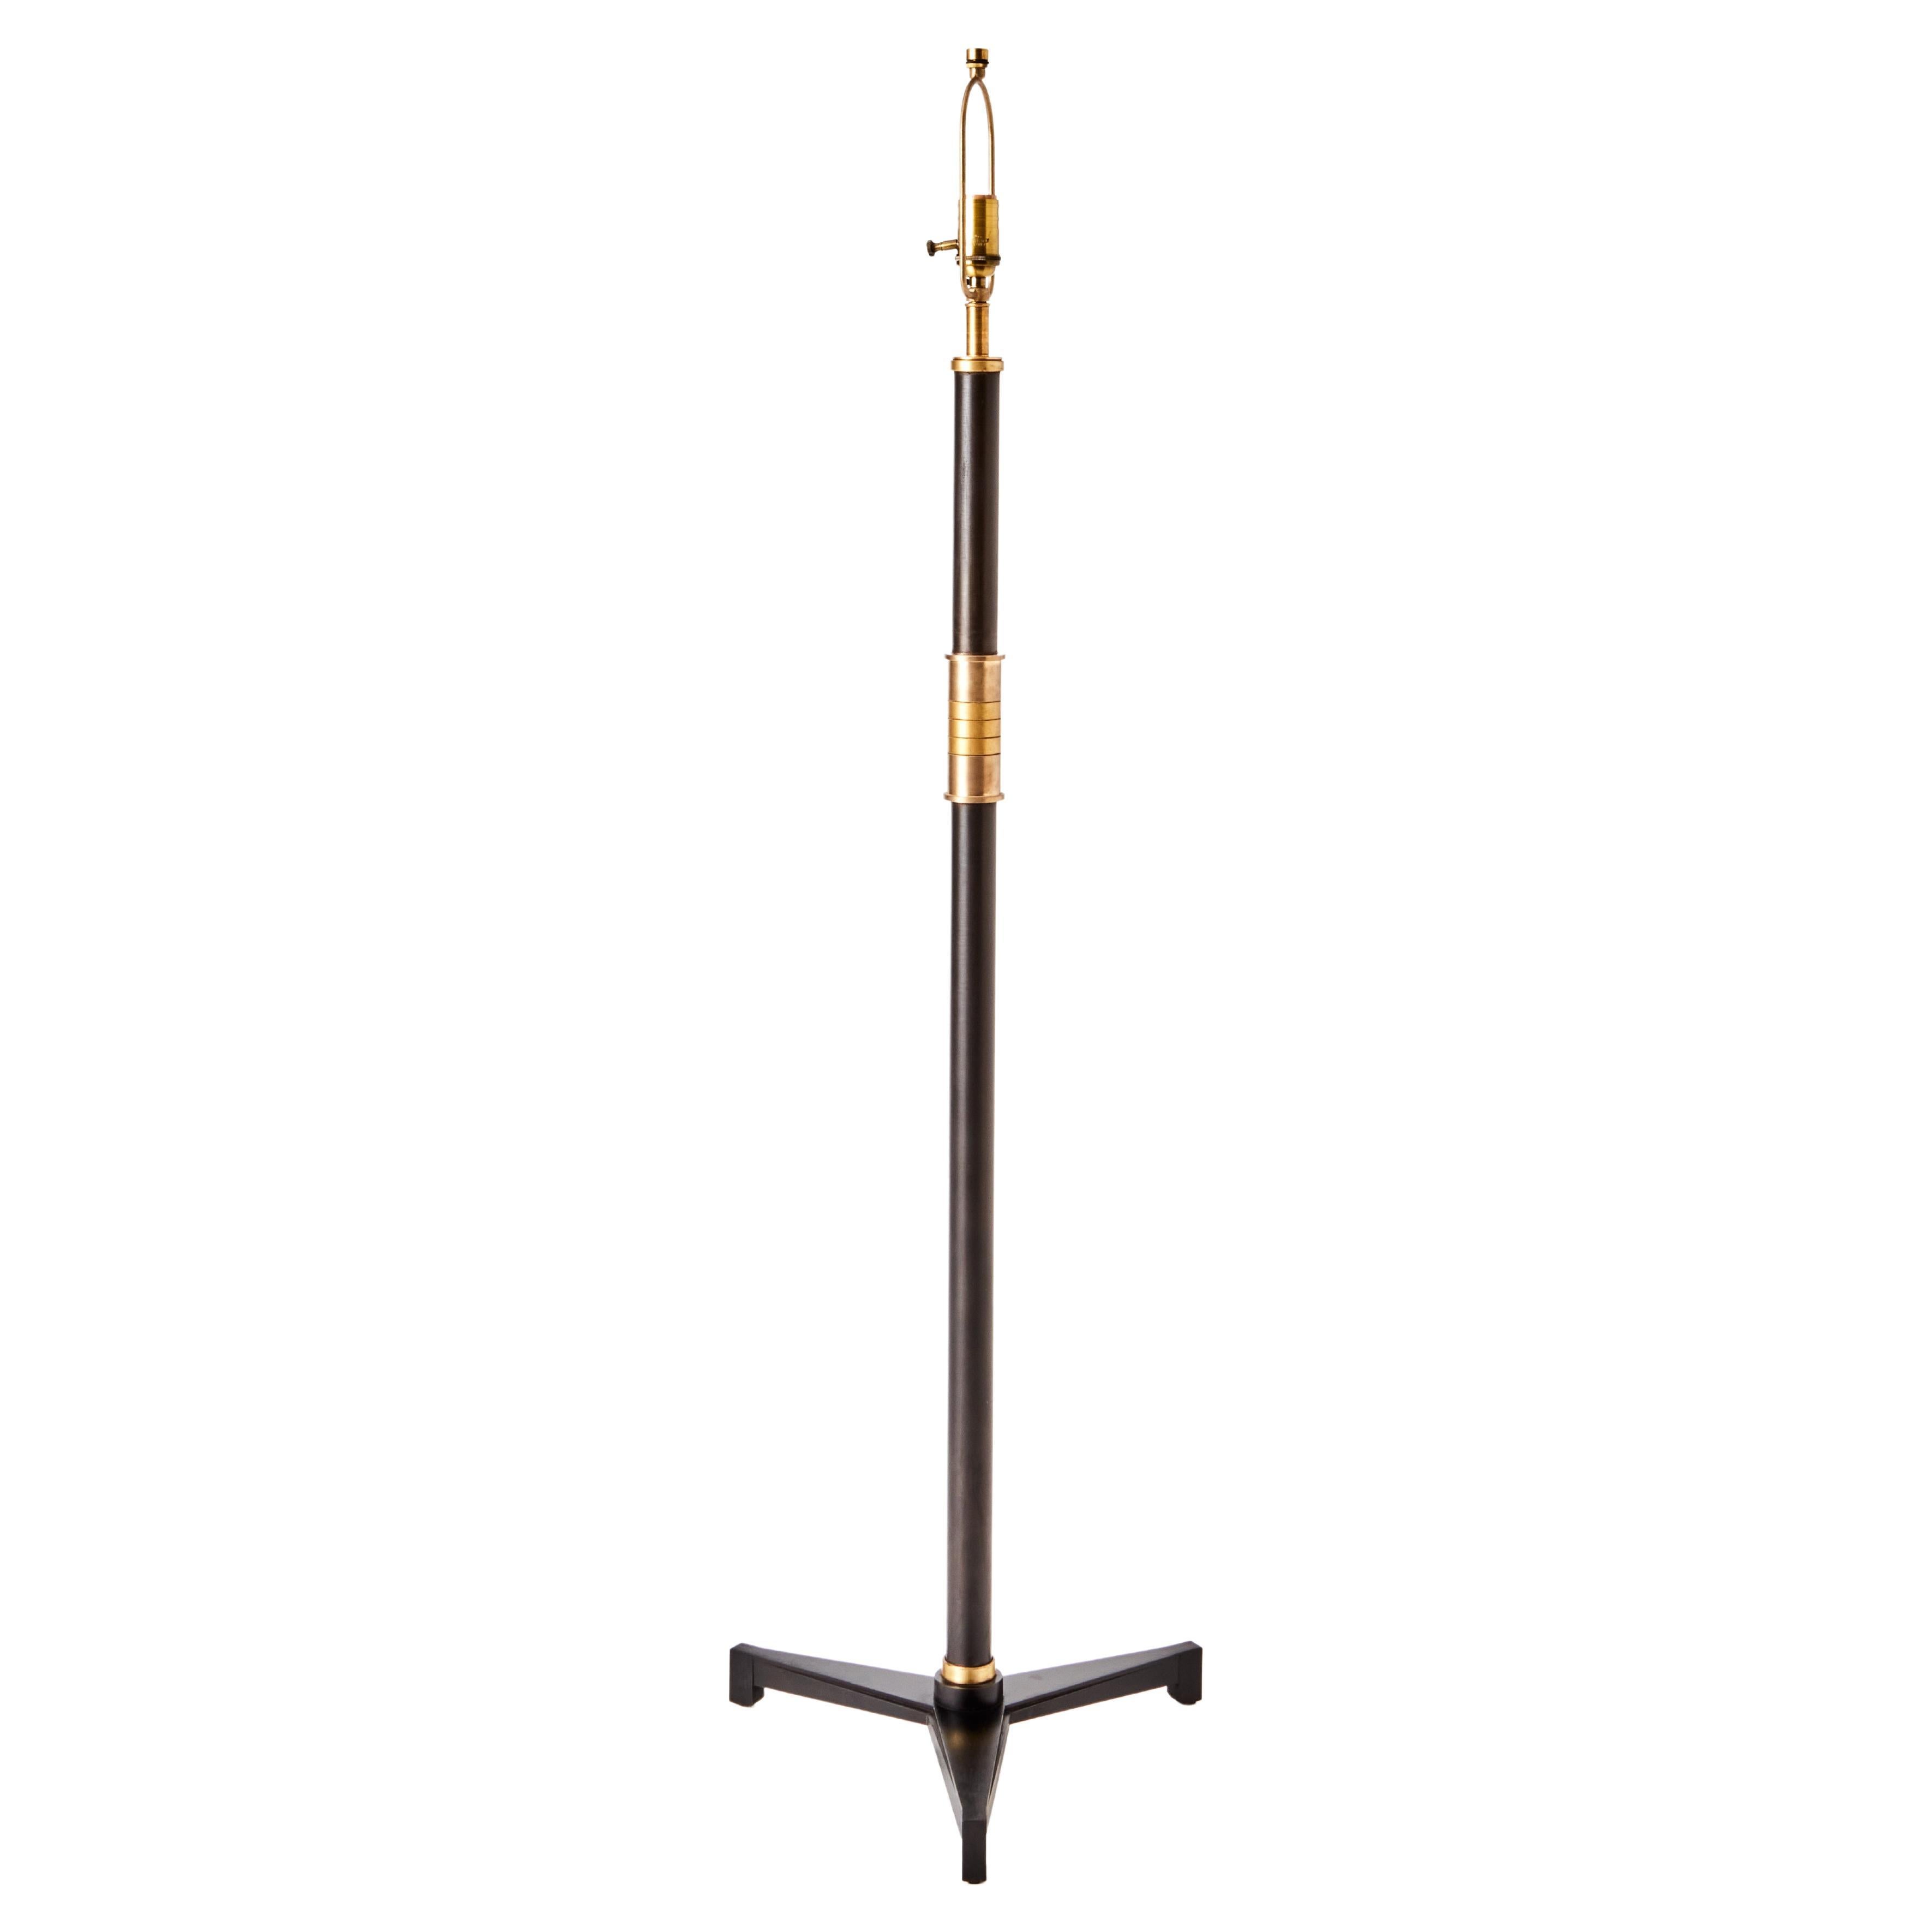 A reduced-height floor lamp intended for use as a reading lamp. Set on a tri foot base featuring tapered fluting which resonates in the art deco movement. The hilt is realized in a series of subtly contrasting brass and bronze bands. This design is